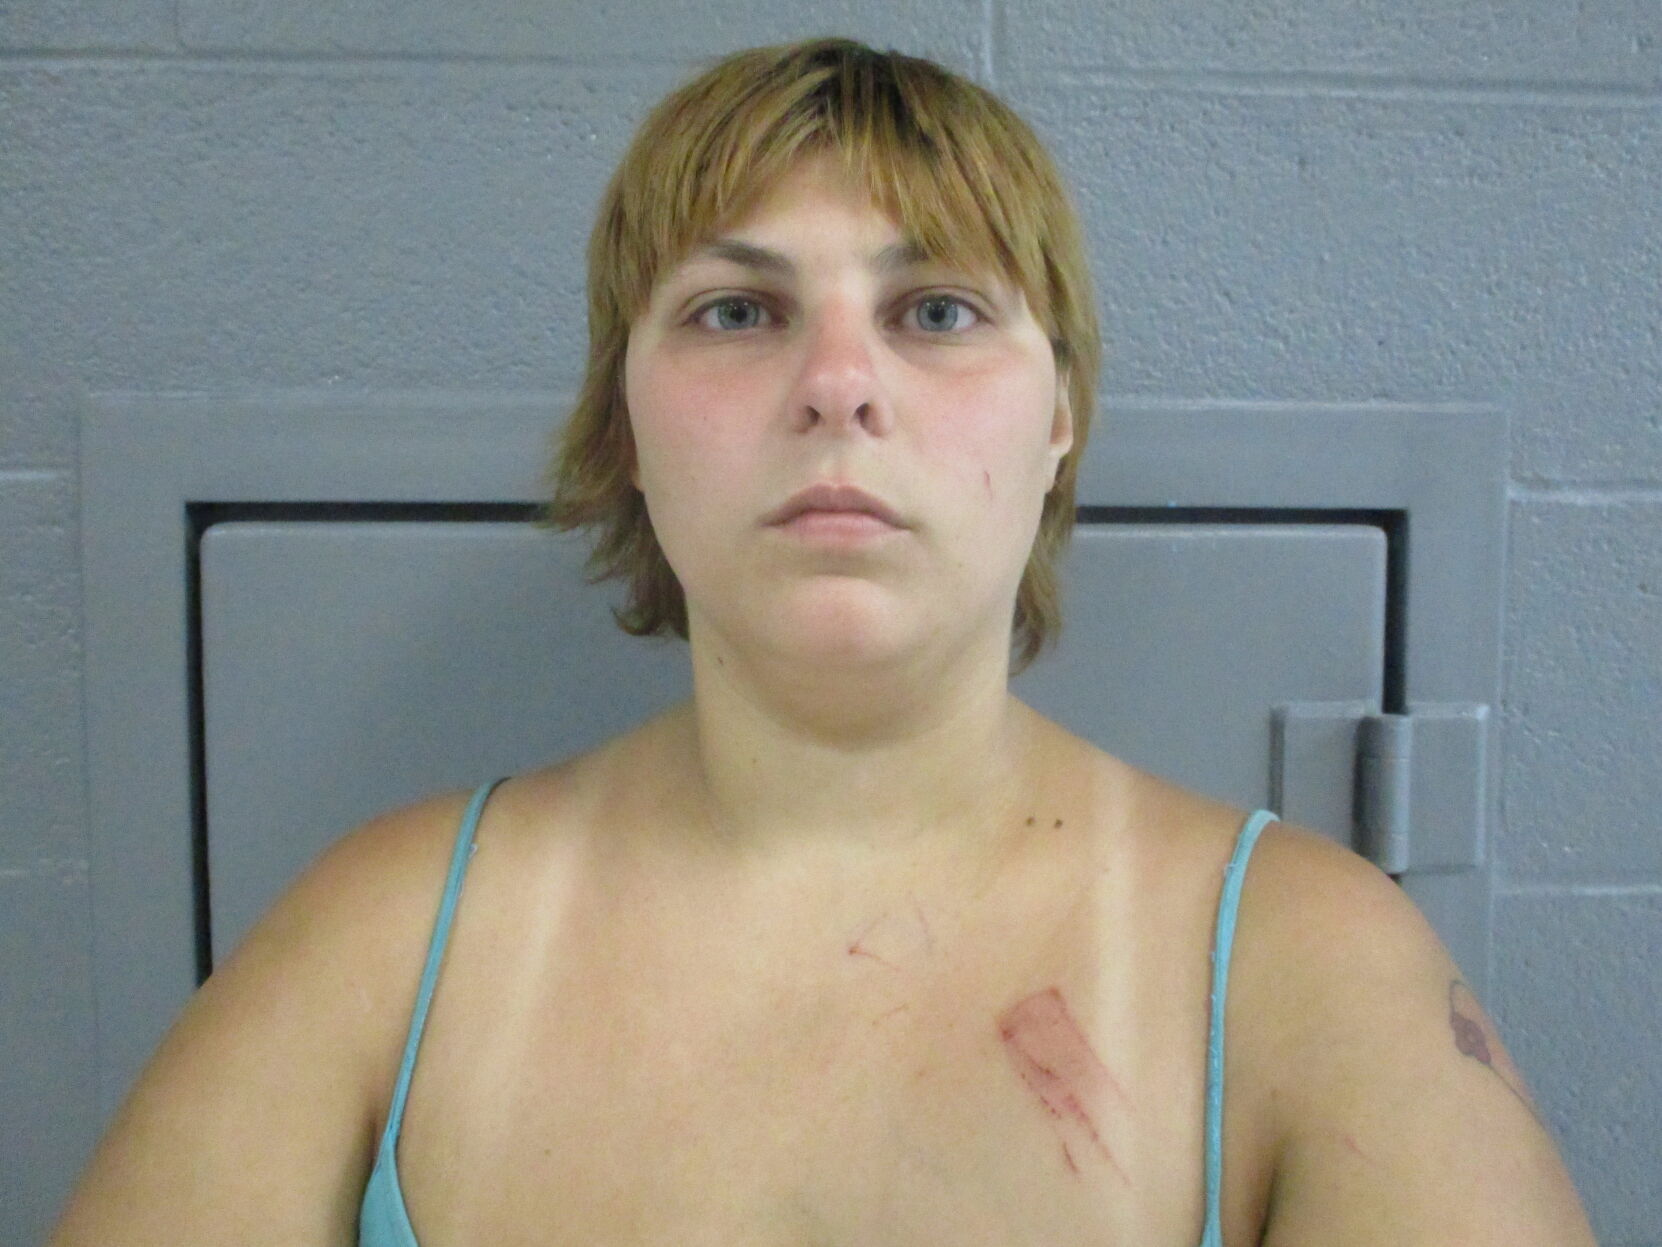 2 face felony child neglect charges; trooper alleges baby had severe diaper rash and lived in squalid conditions Buckhannon News